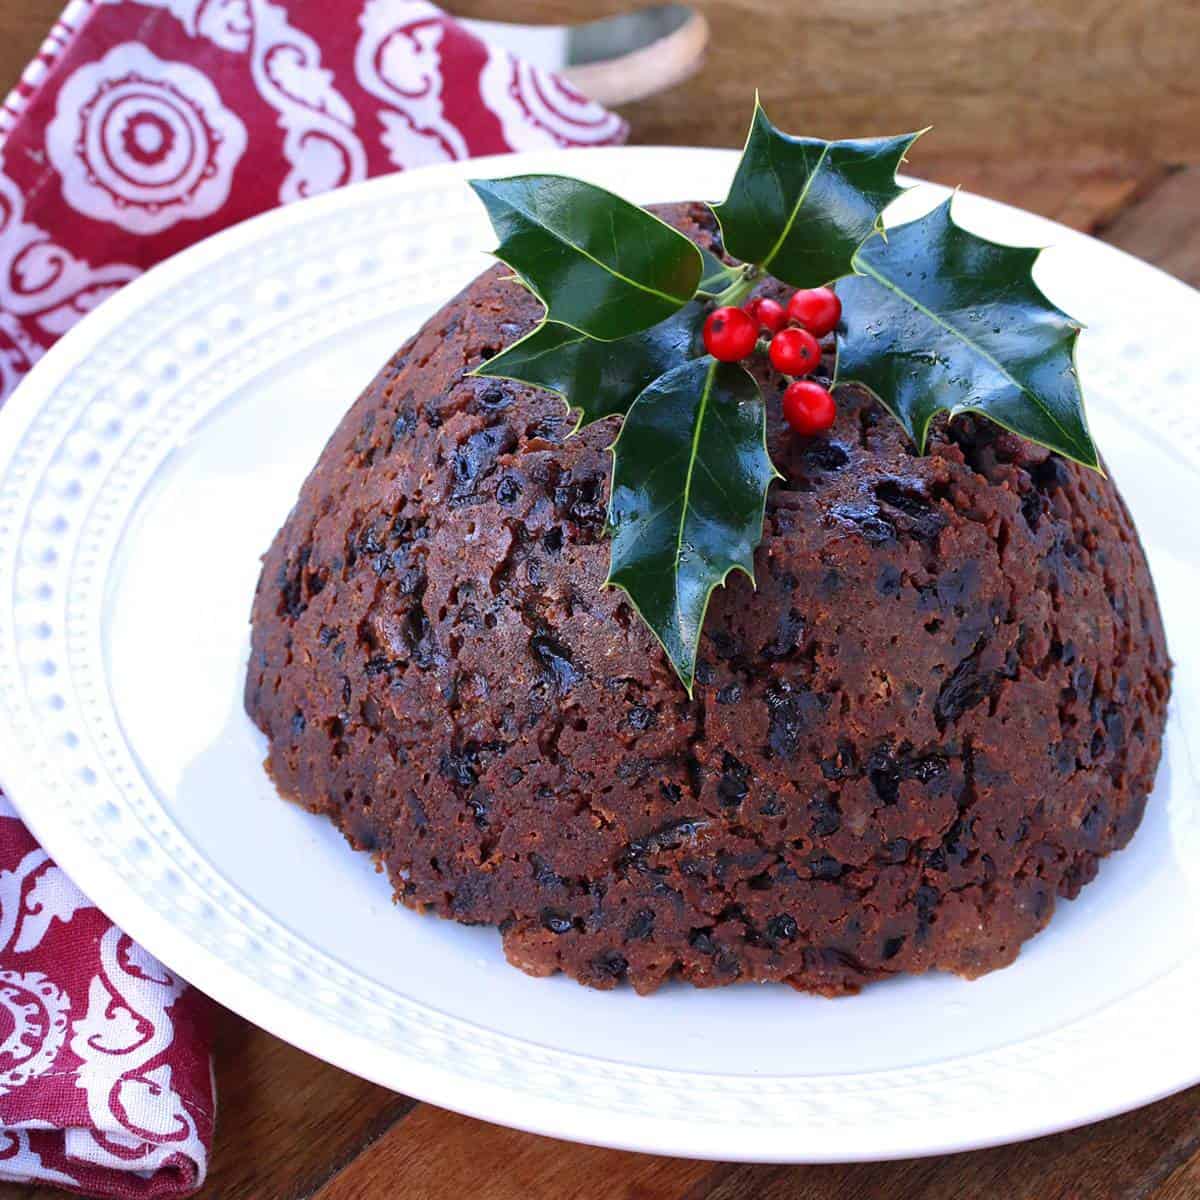 Traditional Christmas Pudding (Figgy Pudding) - The Daring Gourmet